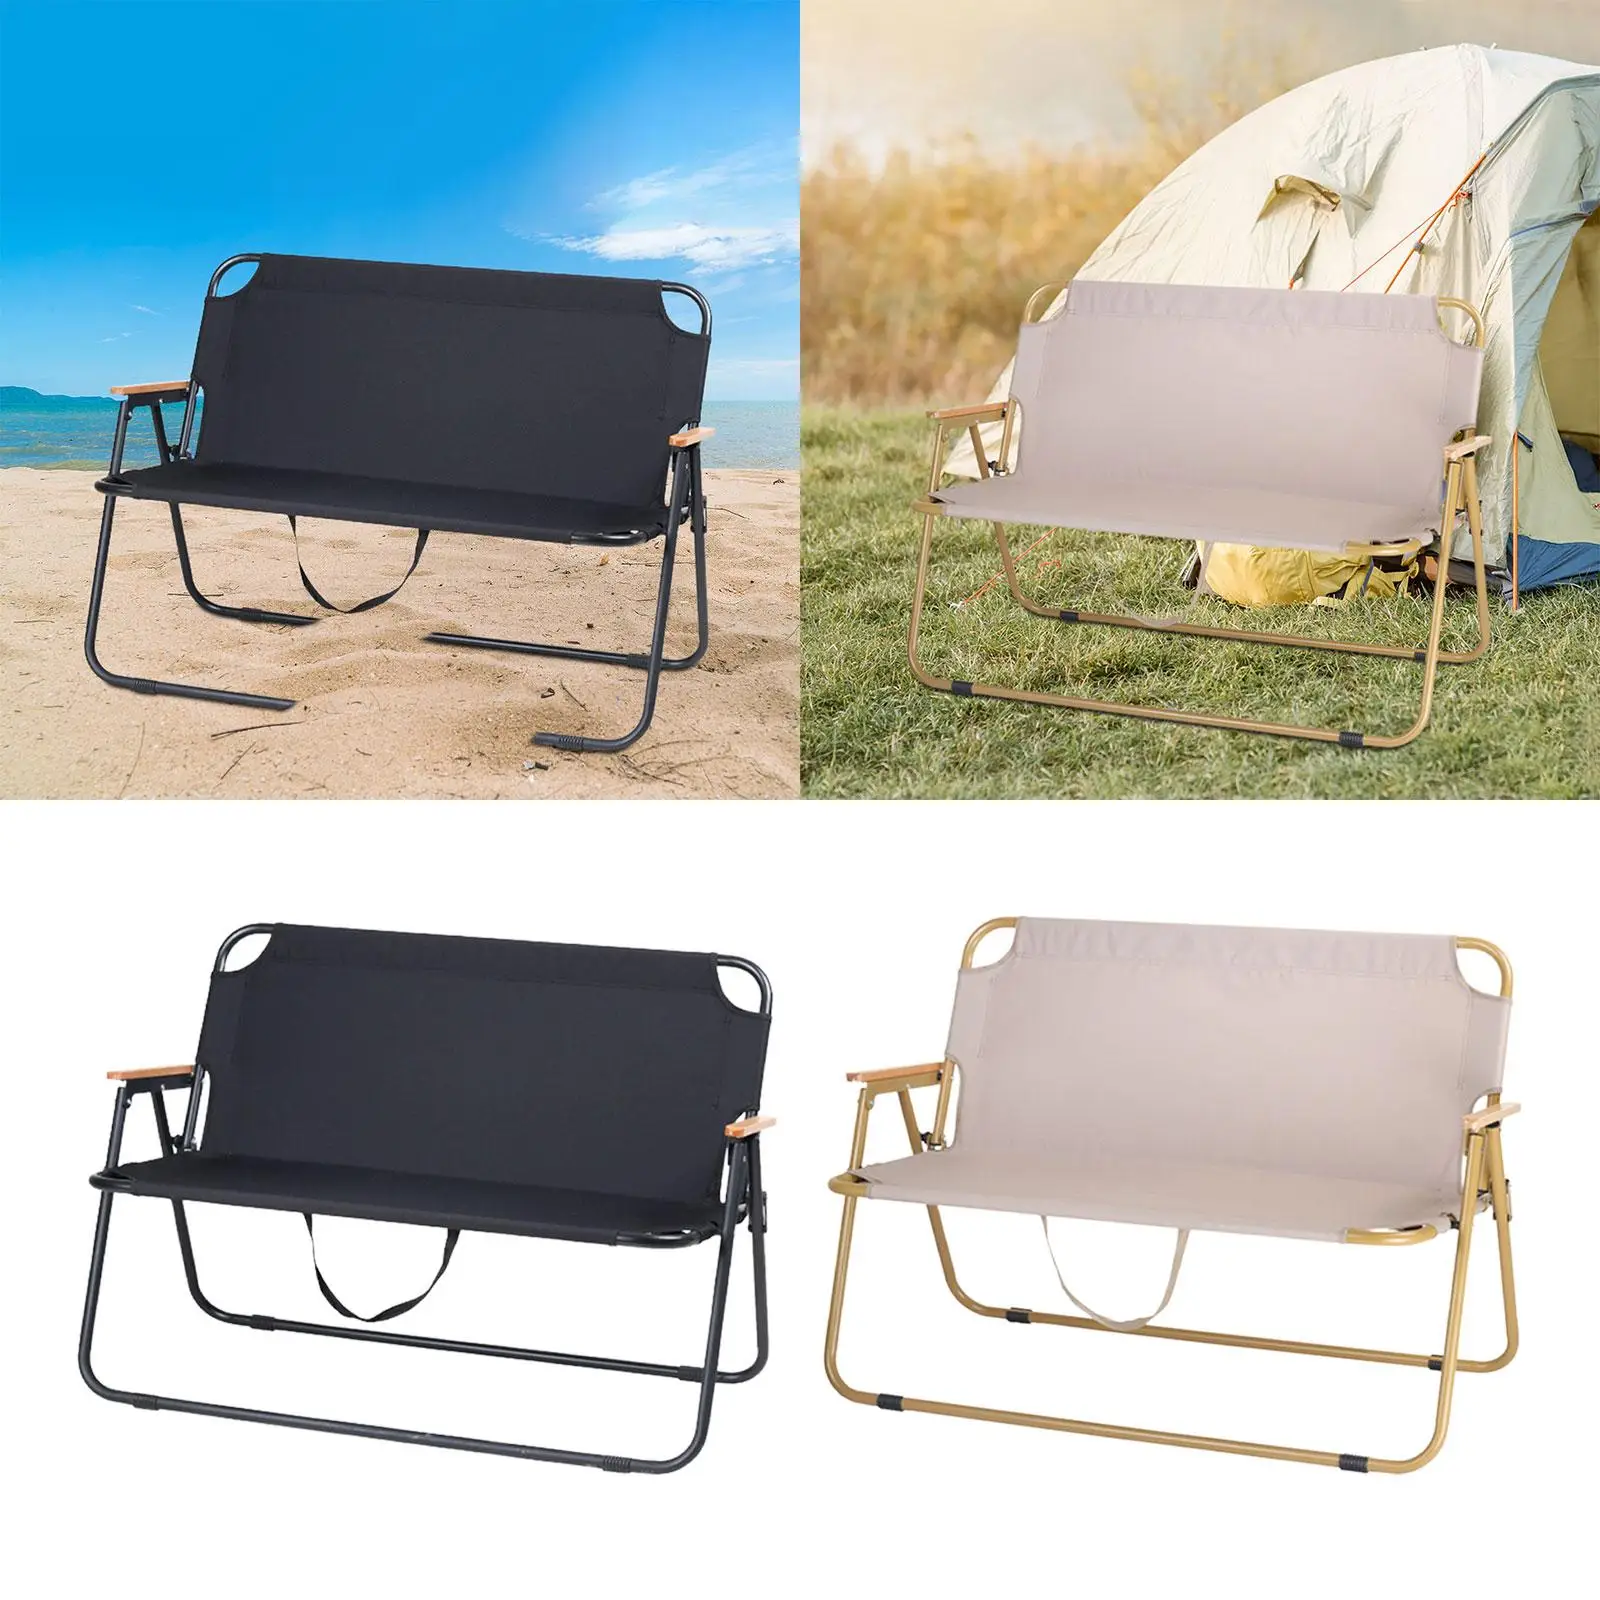 Folding Camping Chair Backpacking Travel Picnic Lightweight Double Chair Fishing Camping Stool Chair Patio Camping Seat Armchair